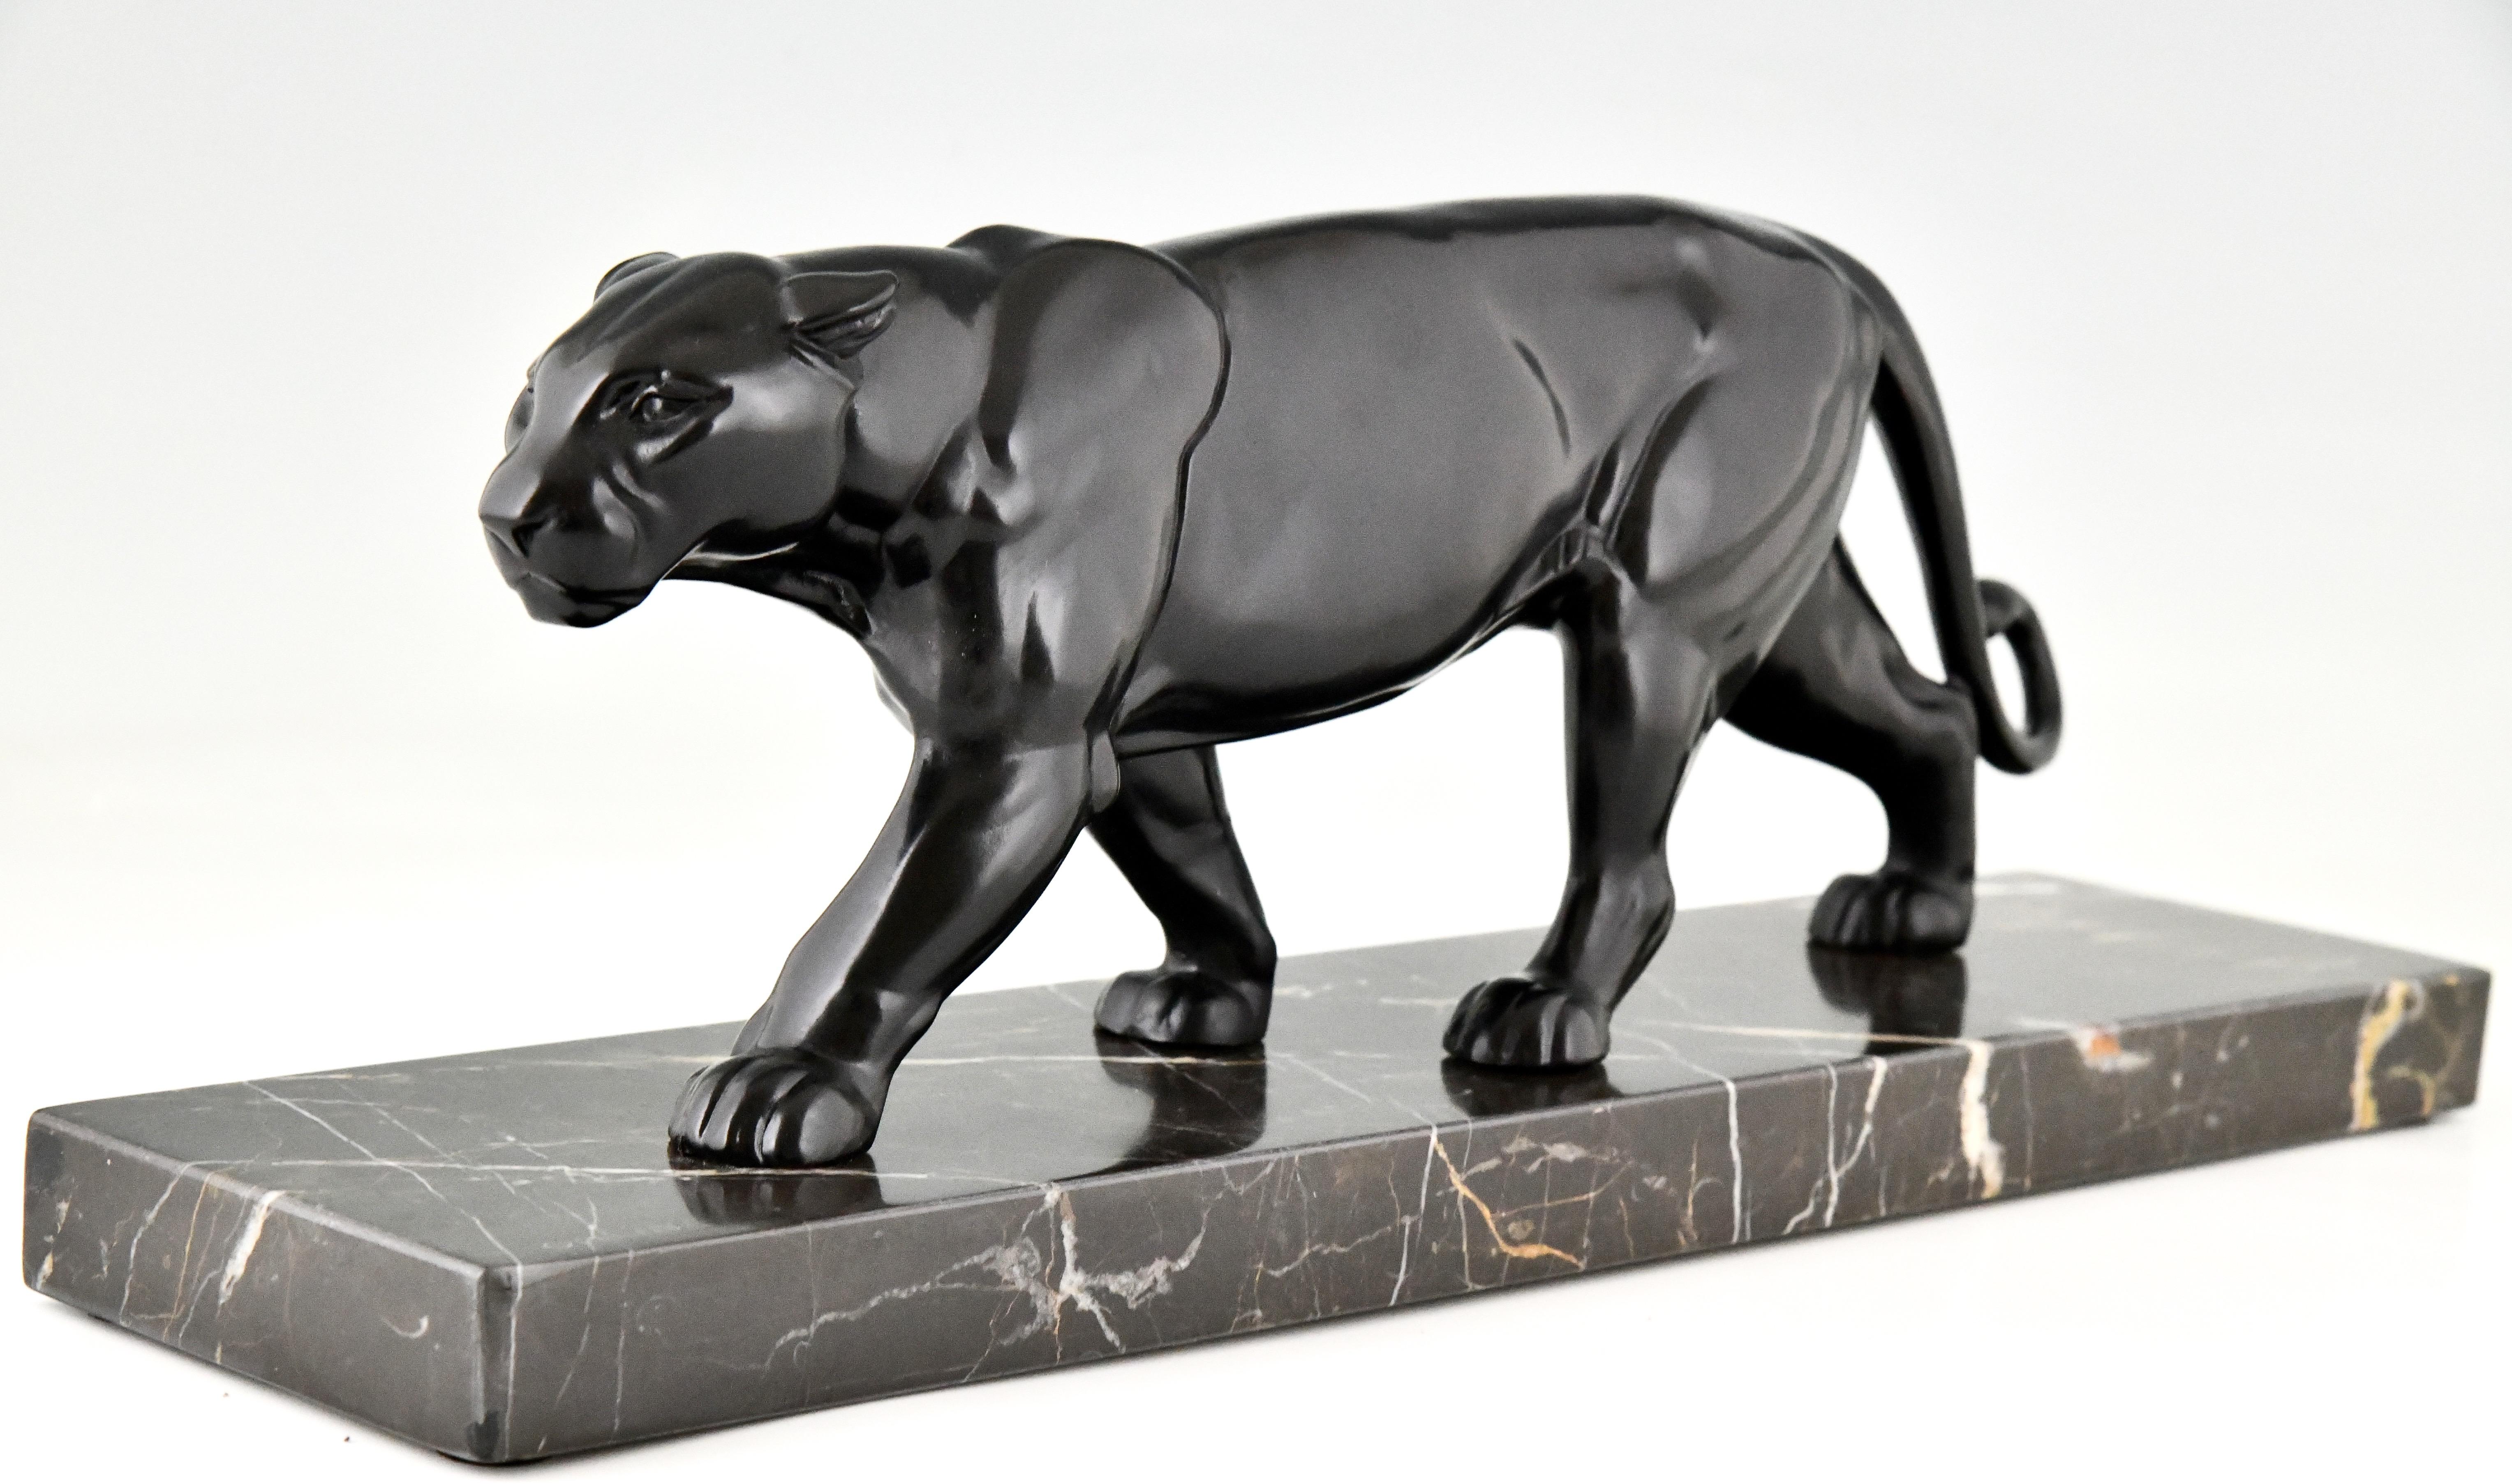 Mid-20th Century Art Deco panther sculpture by Alexandre Ouline